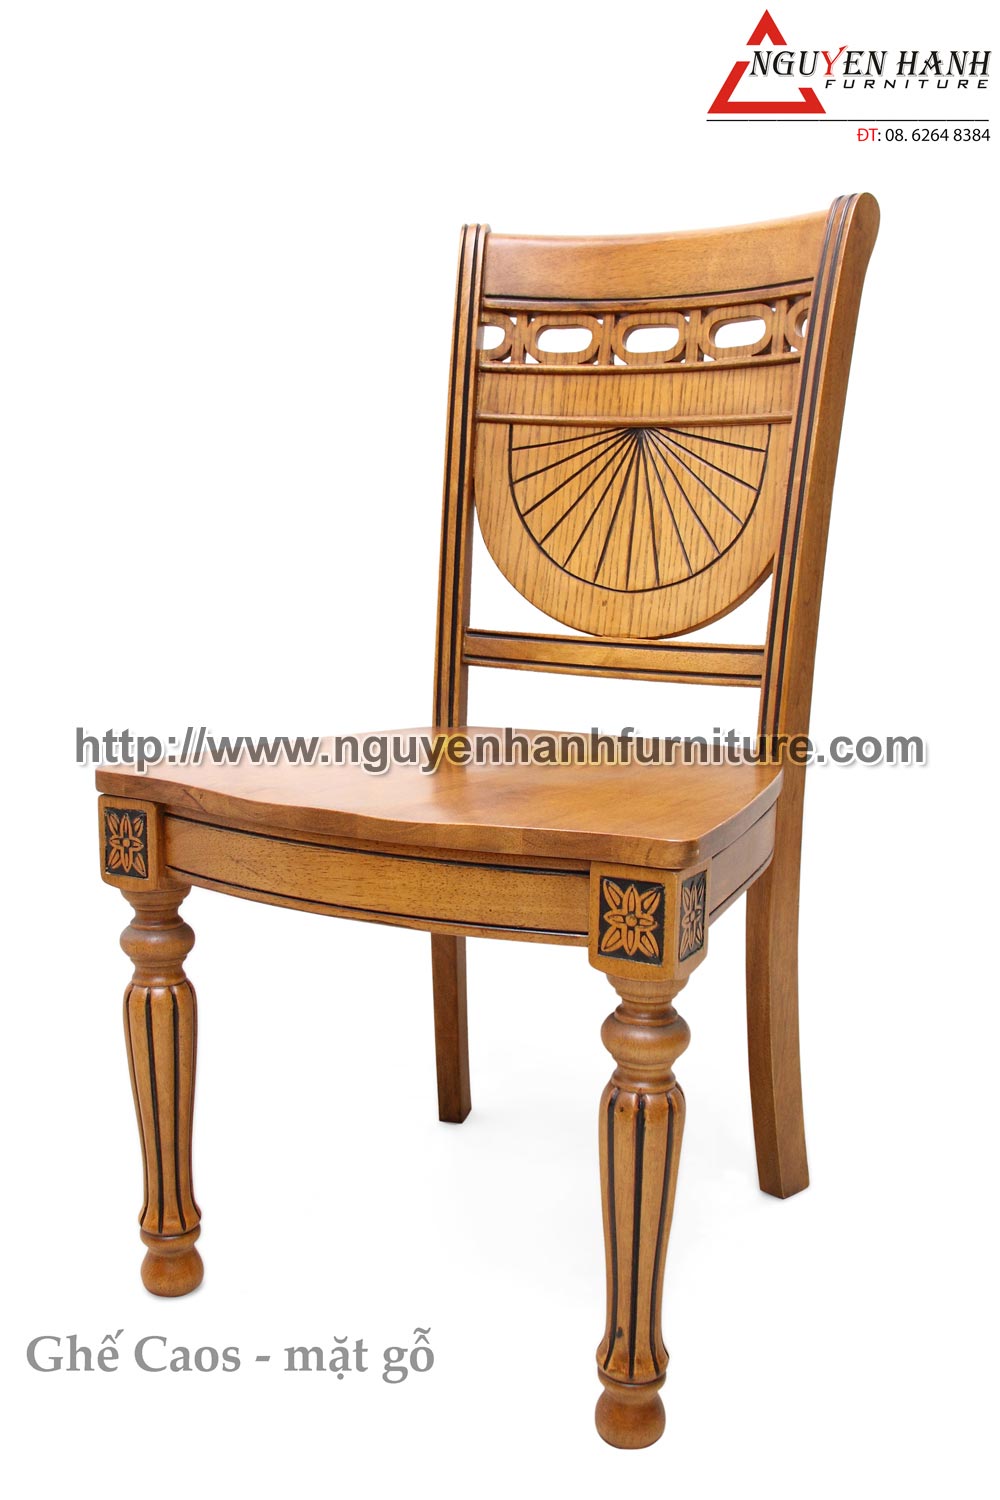 Name product: caos chair- Dimensions:  - Description: Wood natural rubber